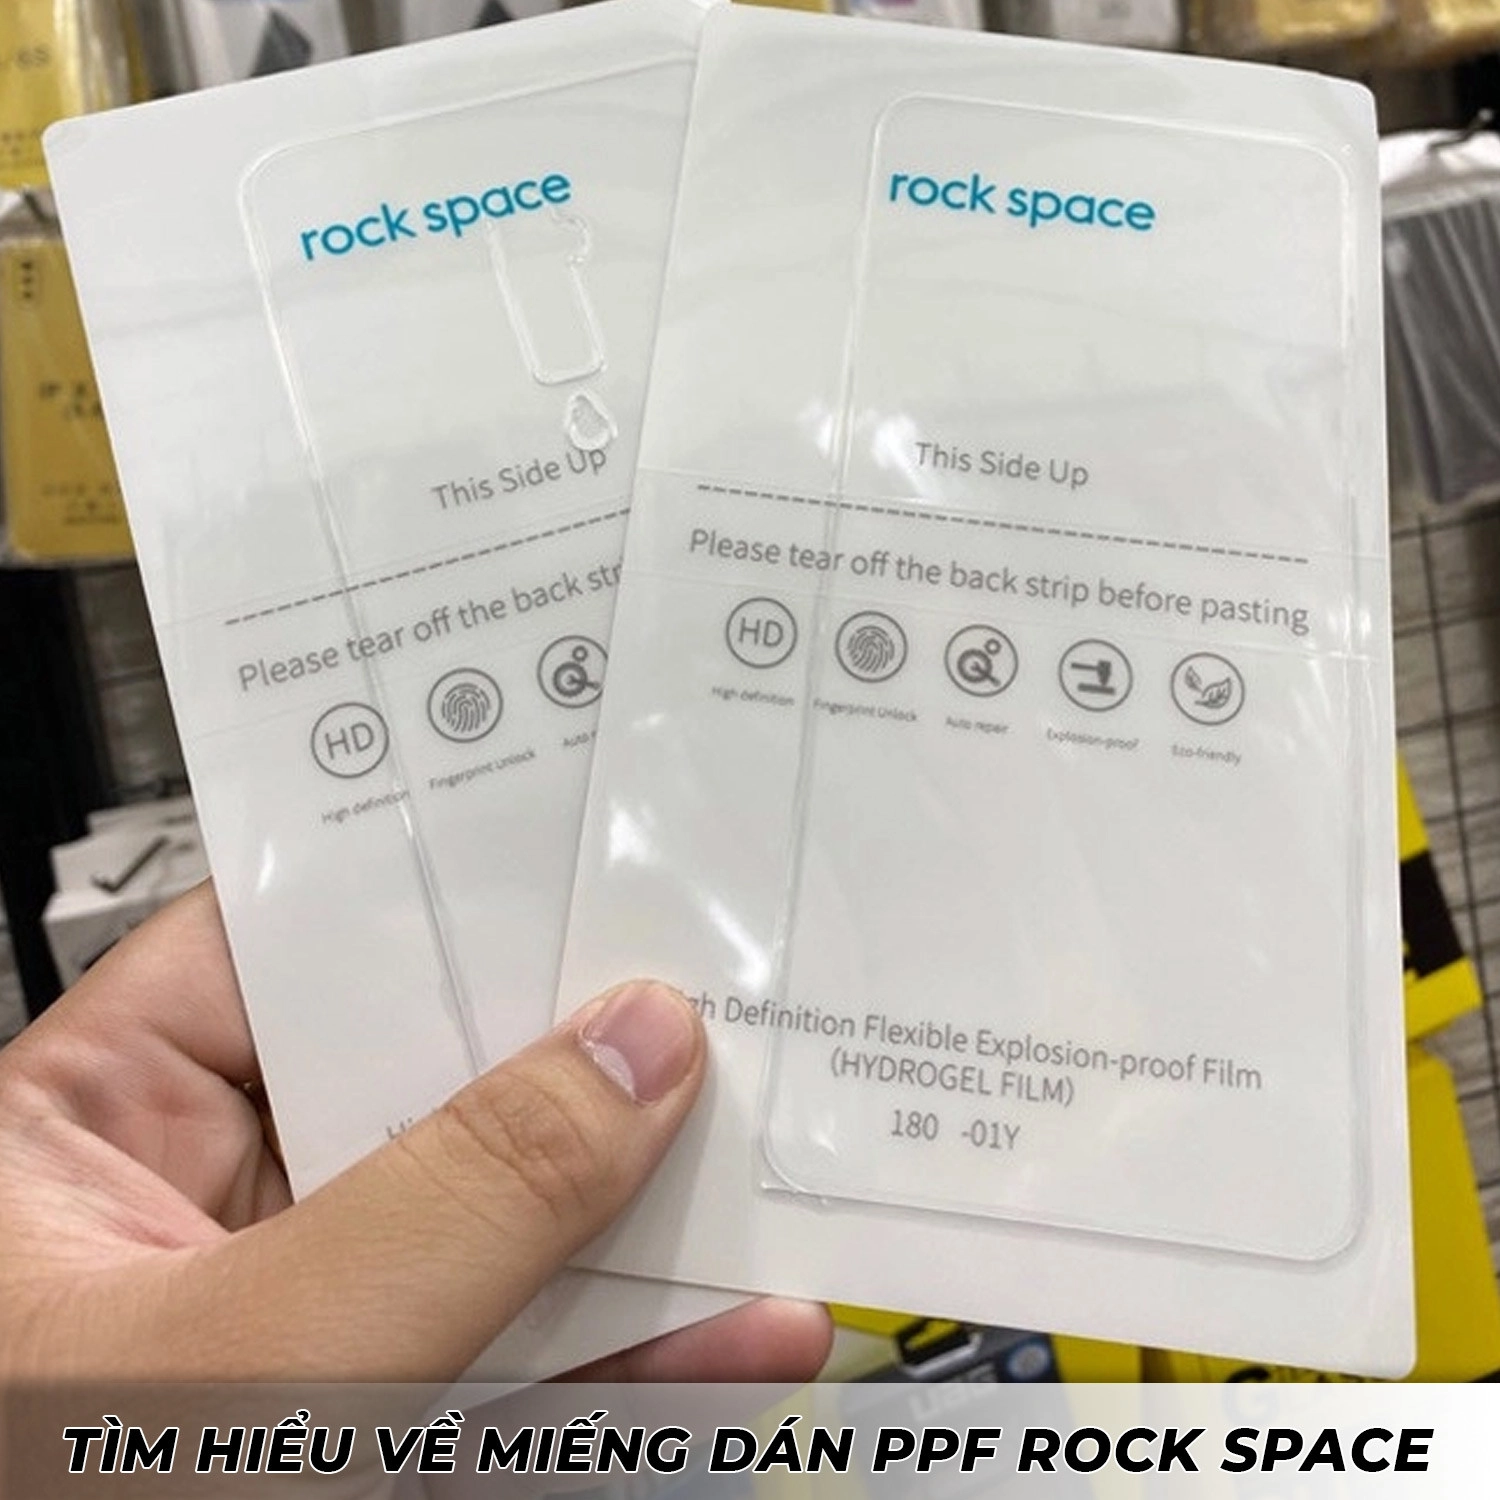 dan-lung-ppf-rock-space-oneplus-ace-2-pro-timhieu